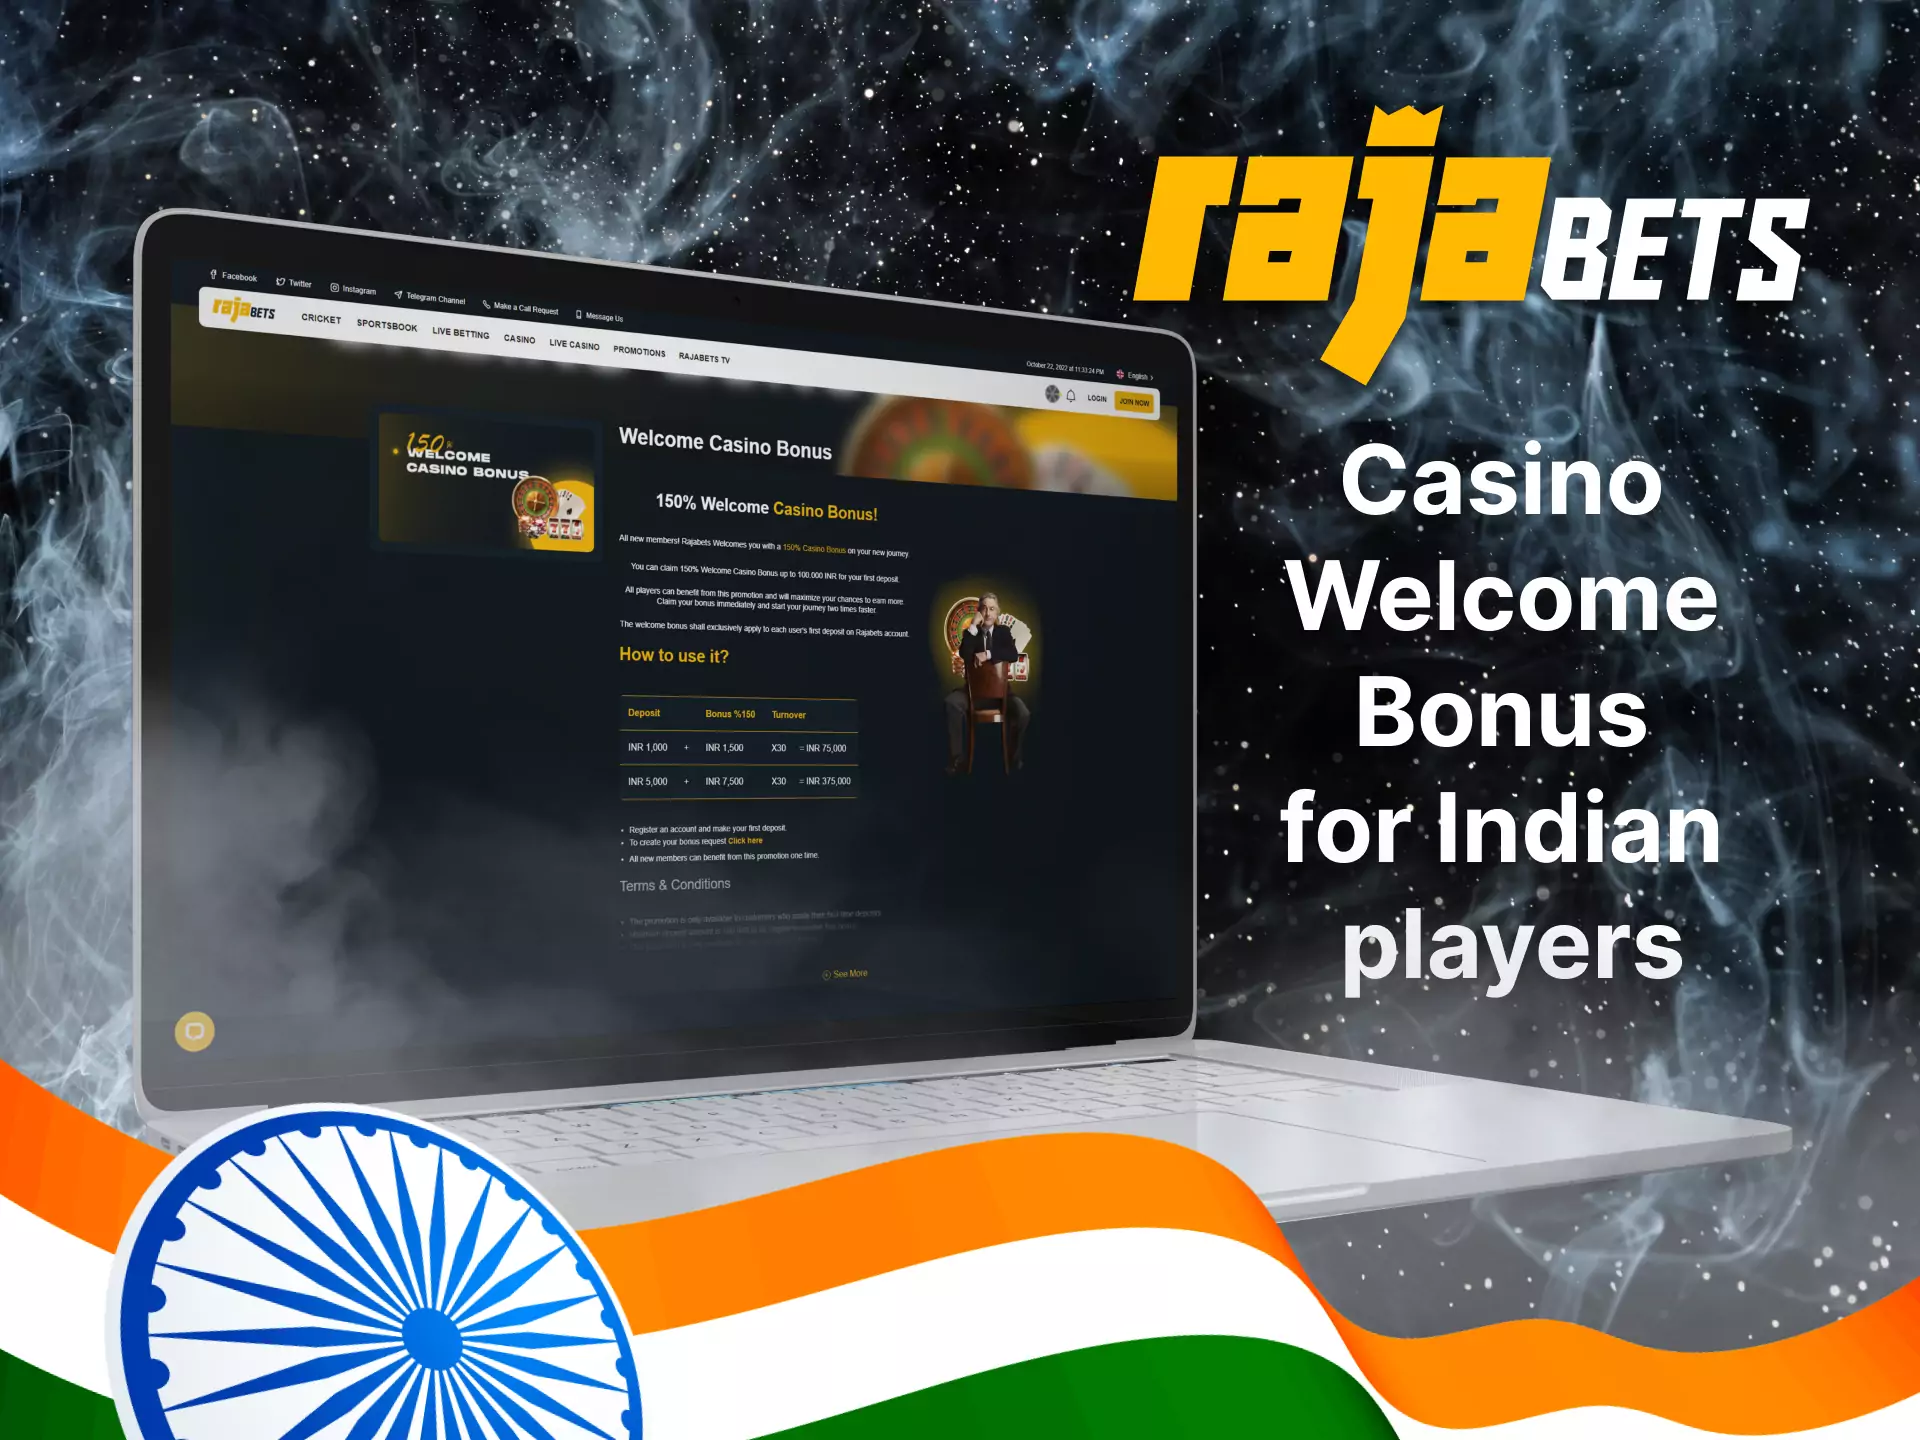 Rajabets Casino has a special welcome bonus, try it.